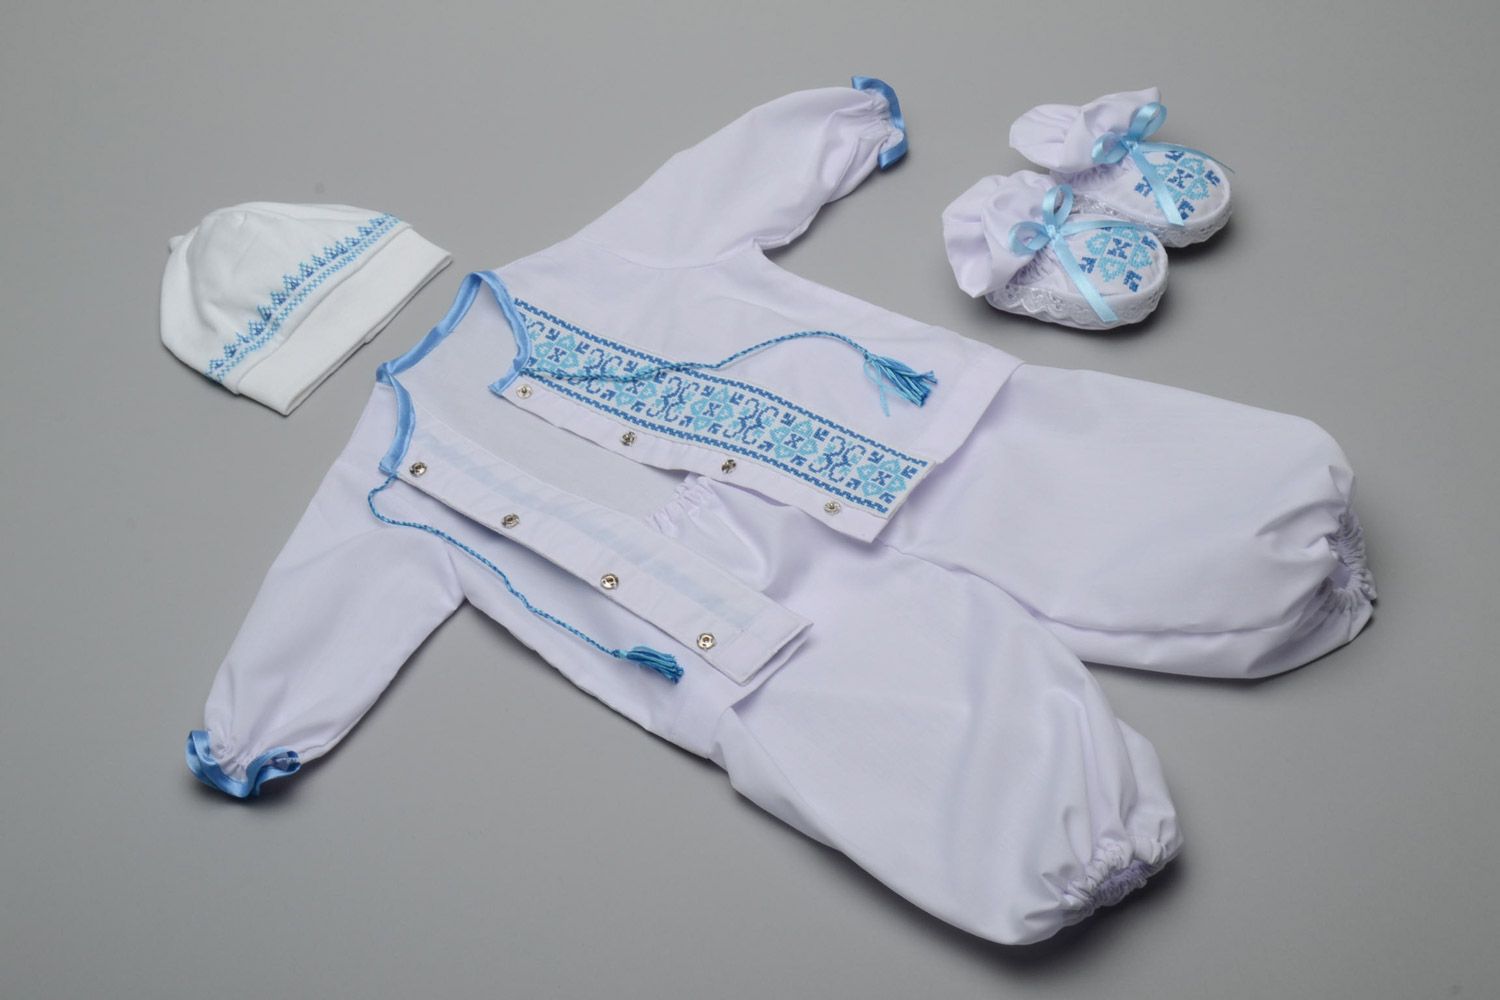 Handmade baby boy clothes set with blue embroidery shirt pants hat and shoes photo 2